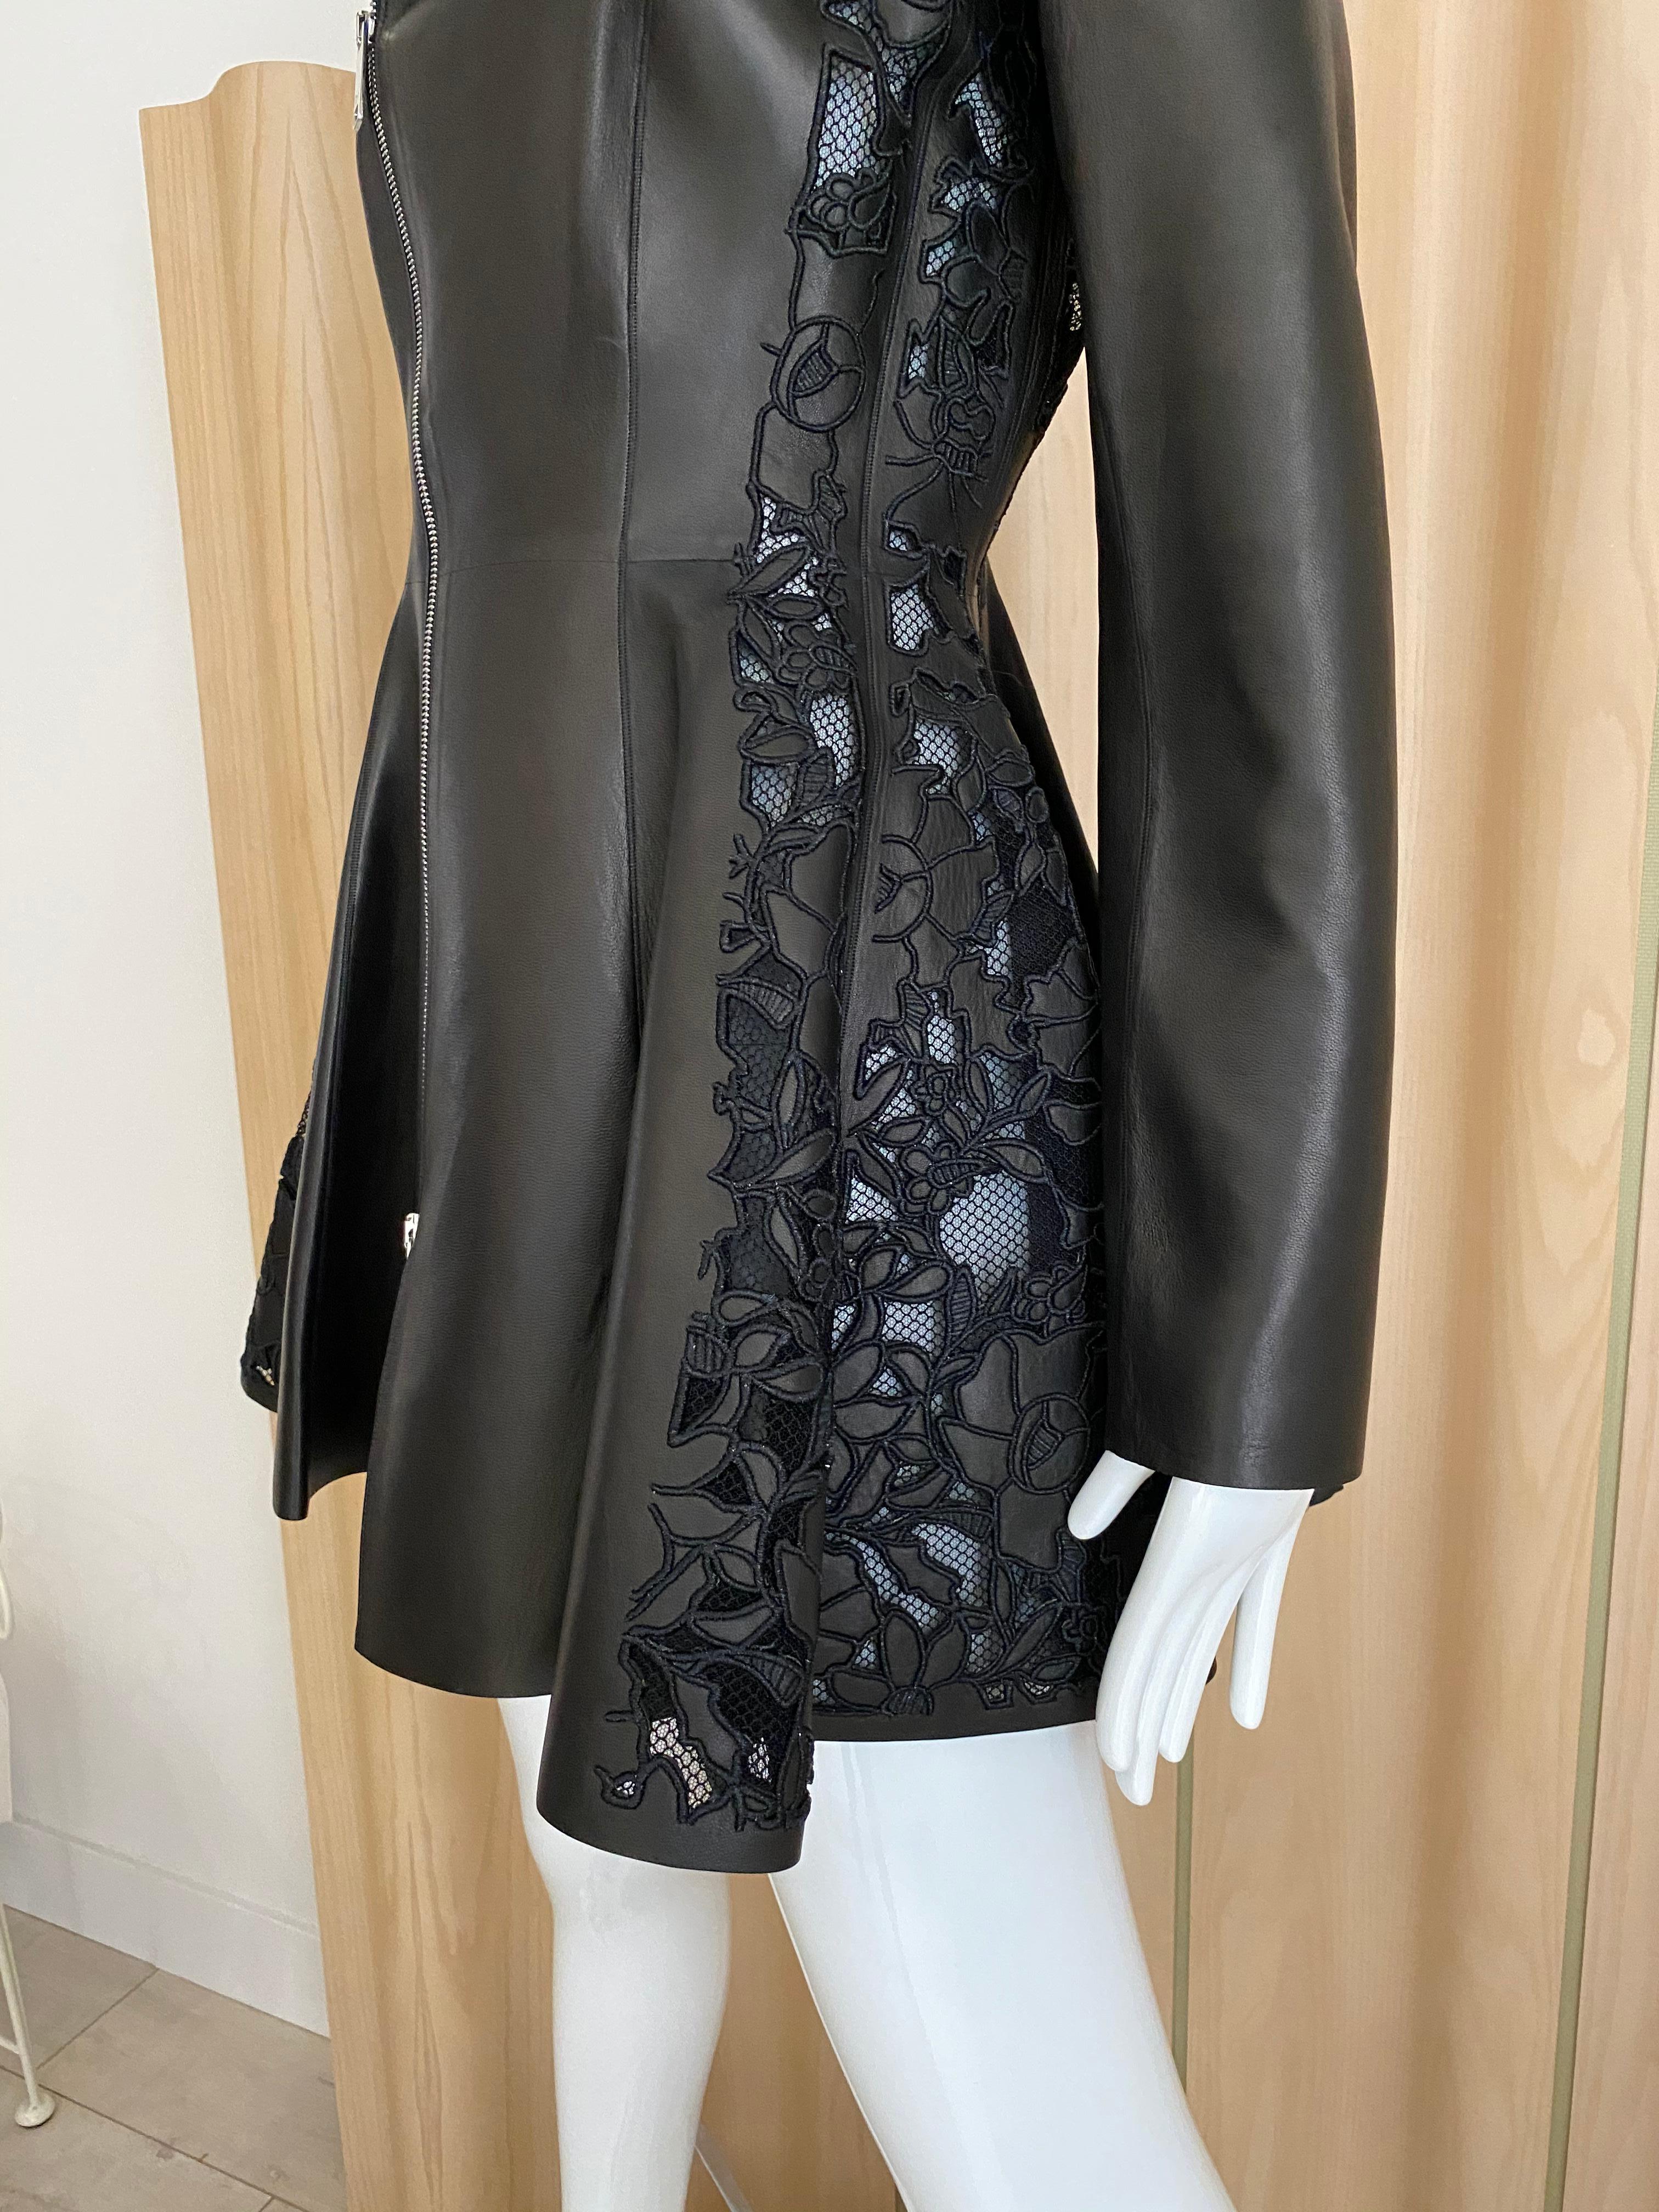 Christian Dior Black Leather Peplum Jacket with Lace  For Sale 1